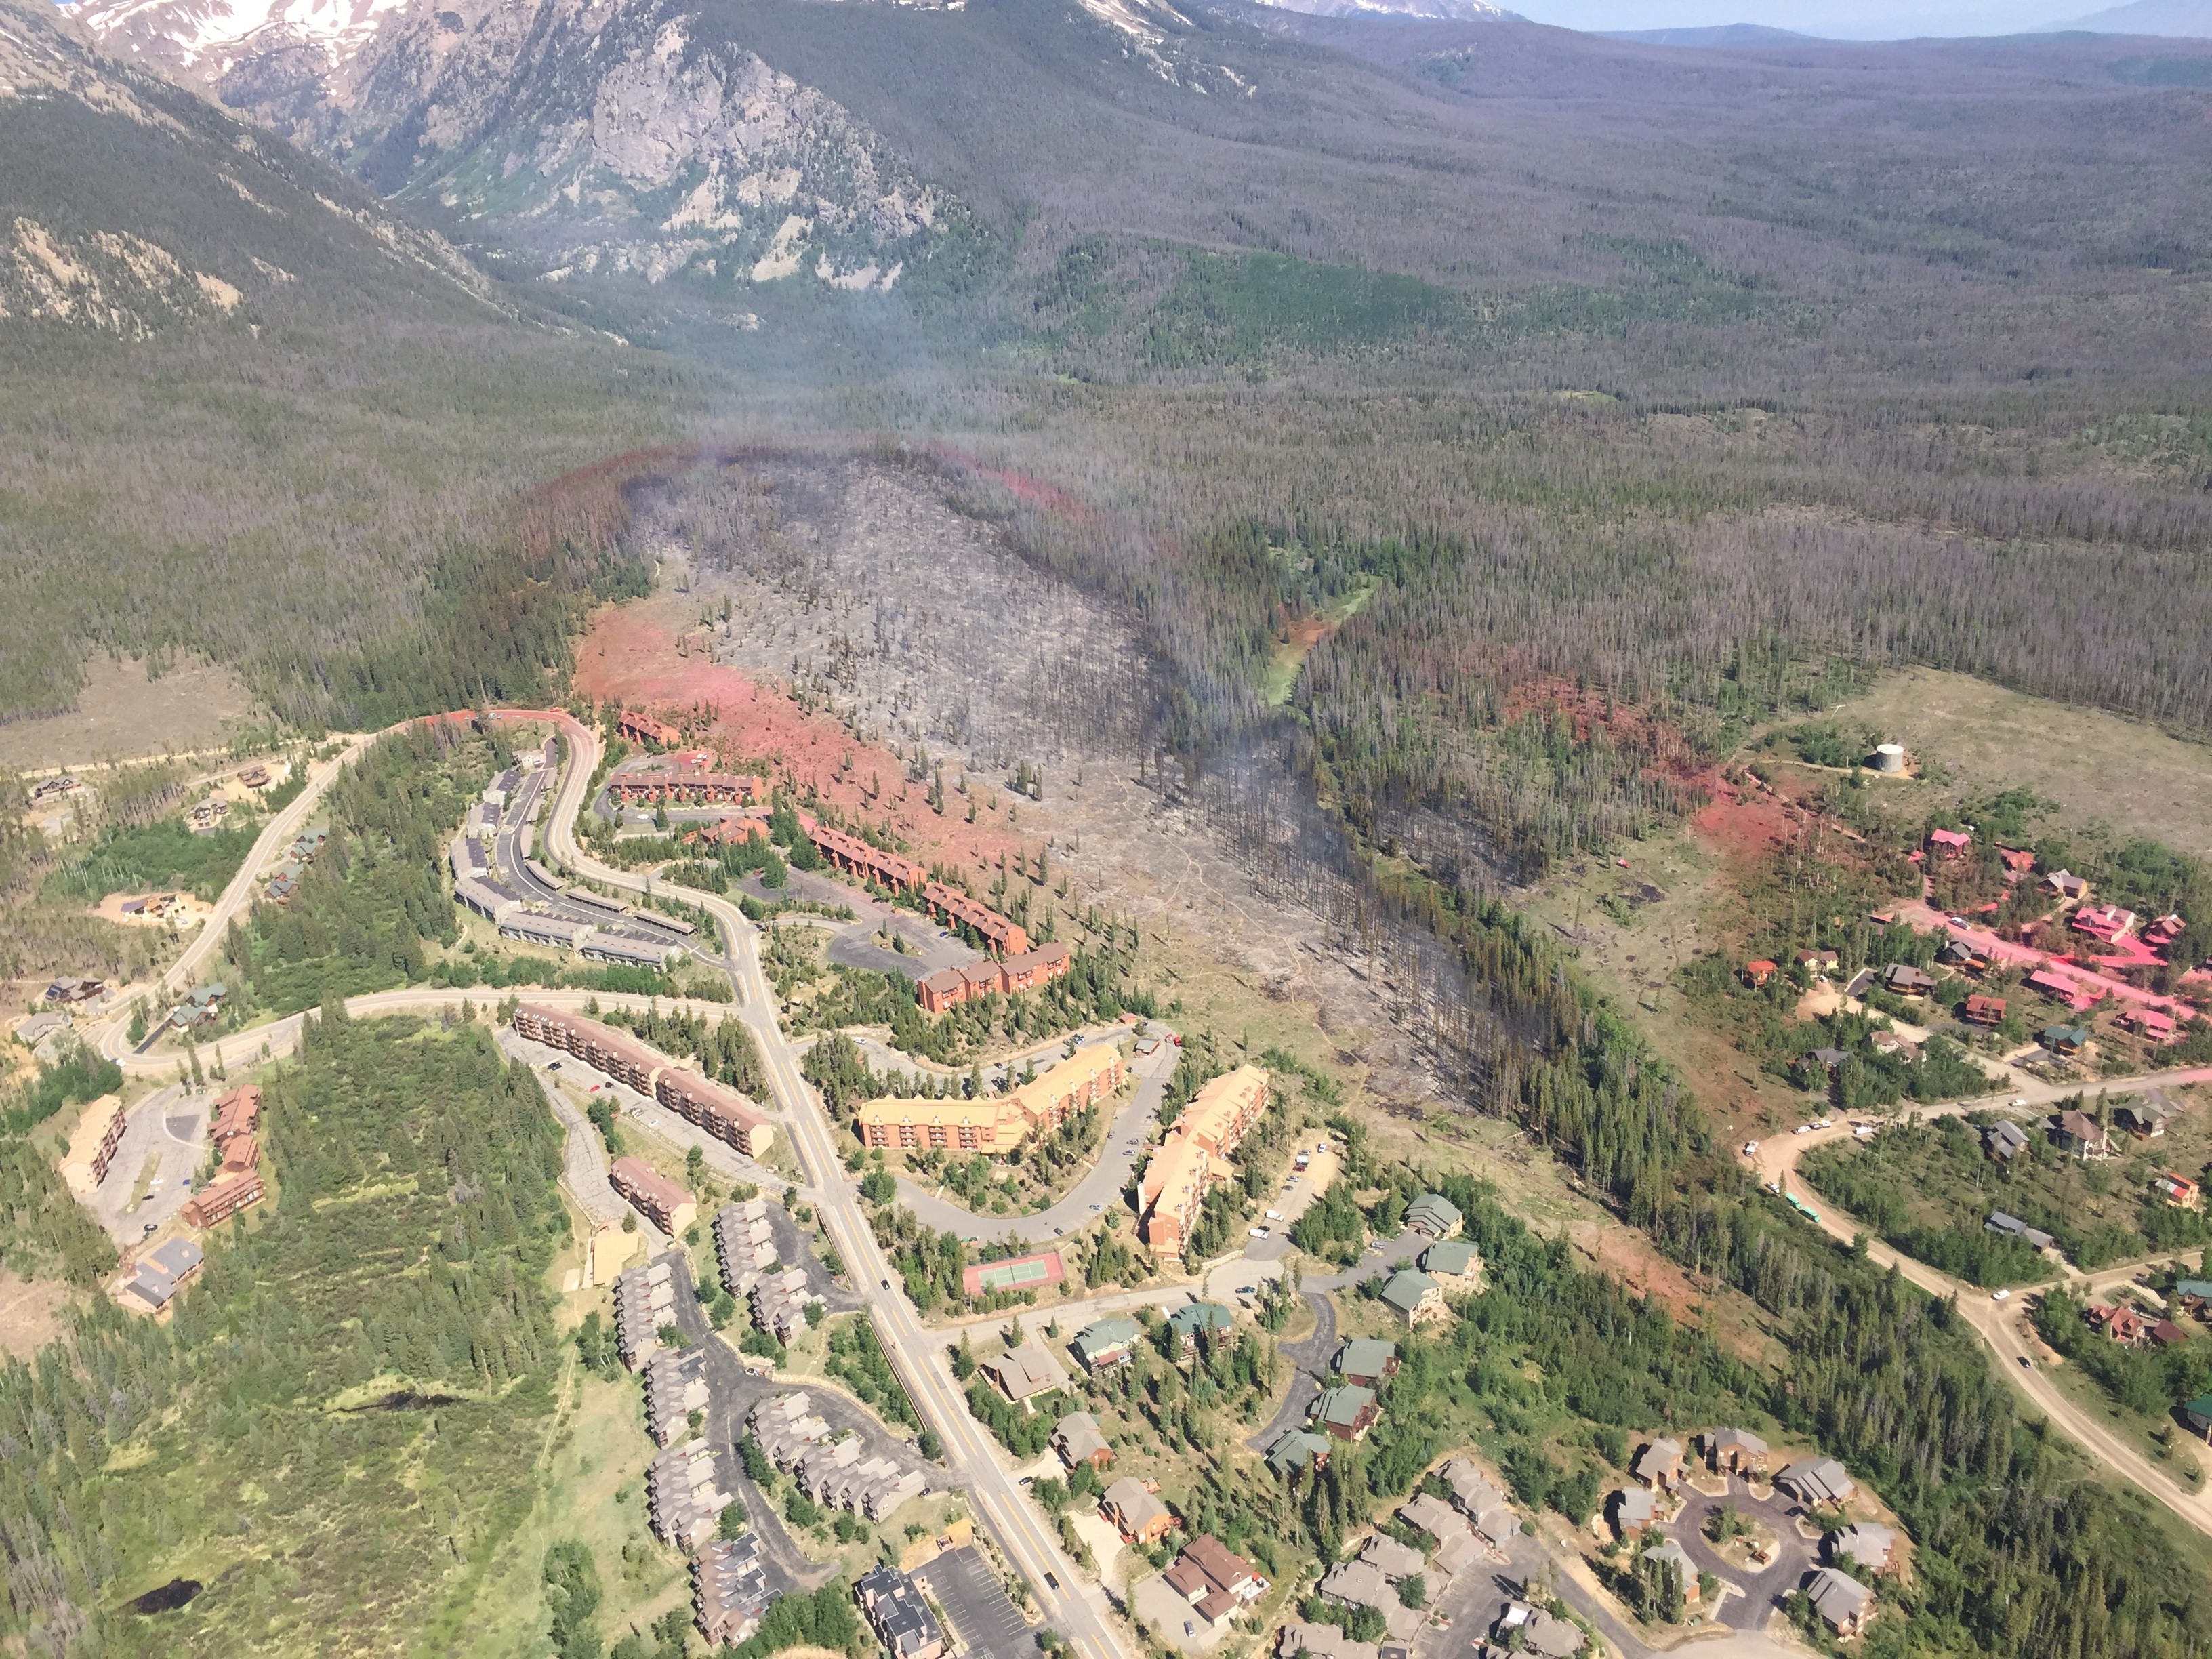 Fuel breaks played an important role protecting homes during the Buffalo Fire on June 12, 2018, in Summit County. Credit USDA Forest Service.